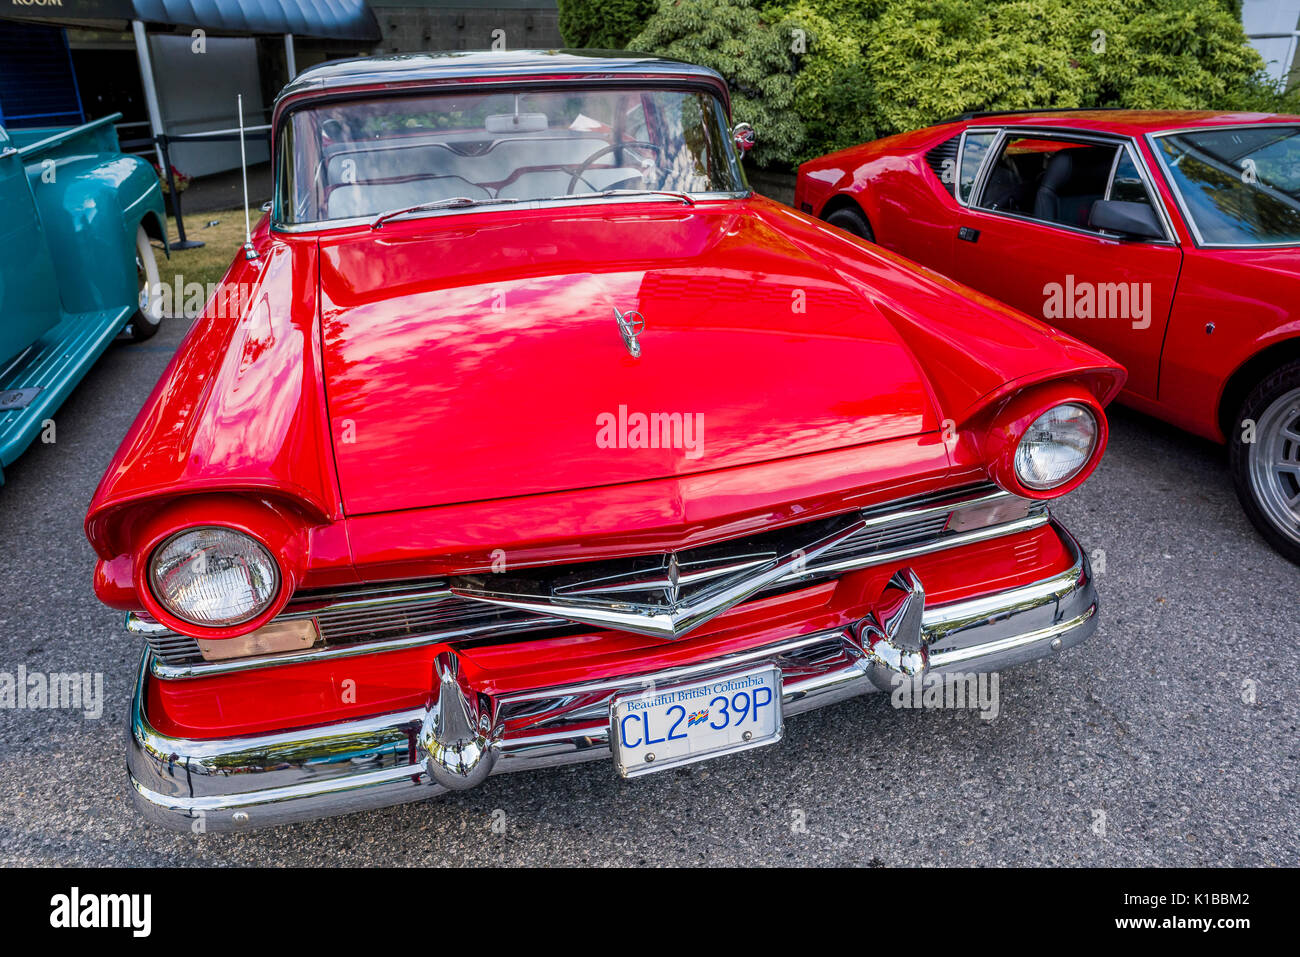 vintage red car Stock Photo